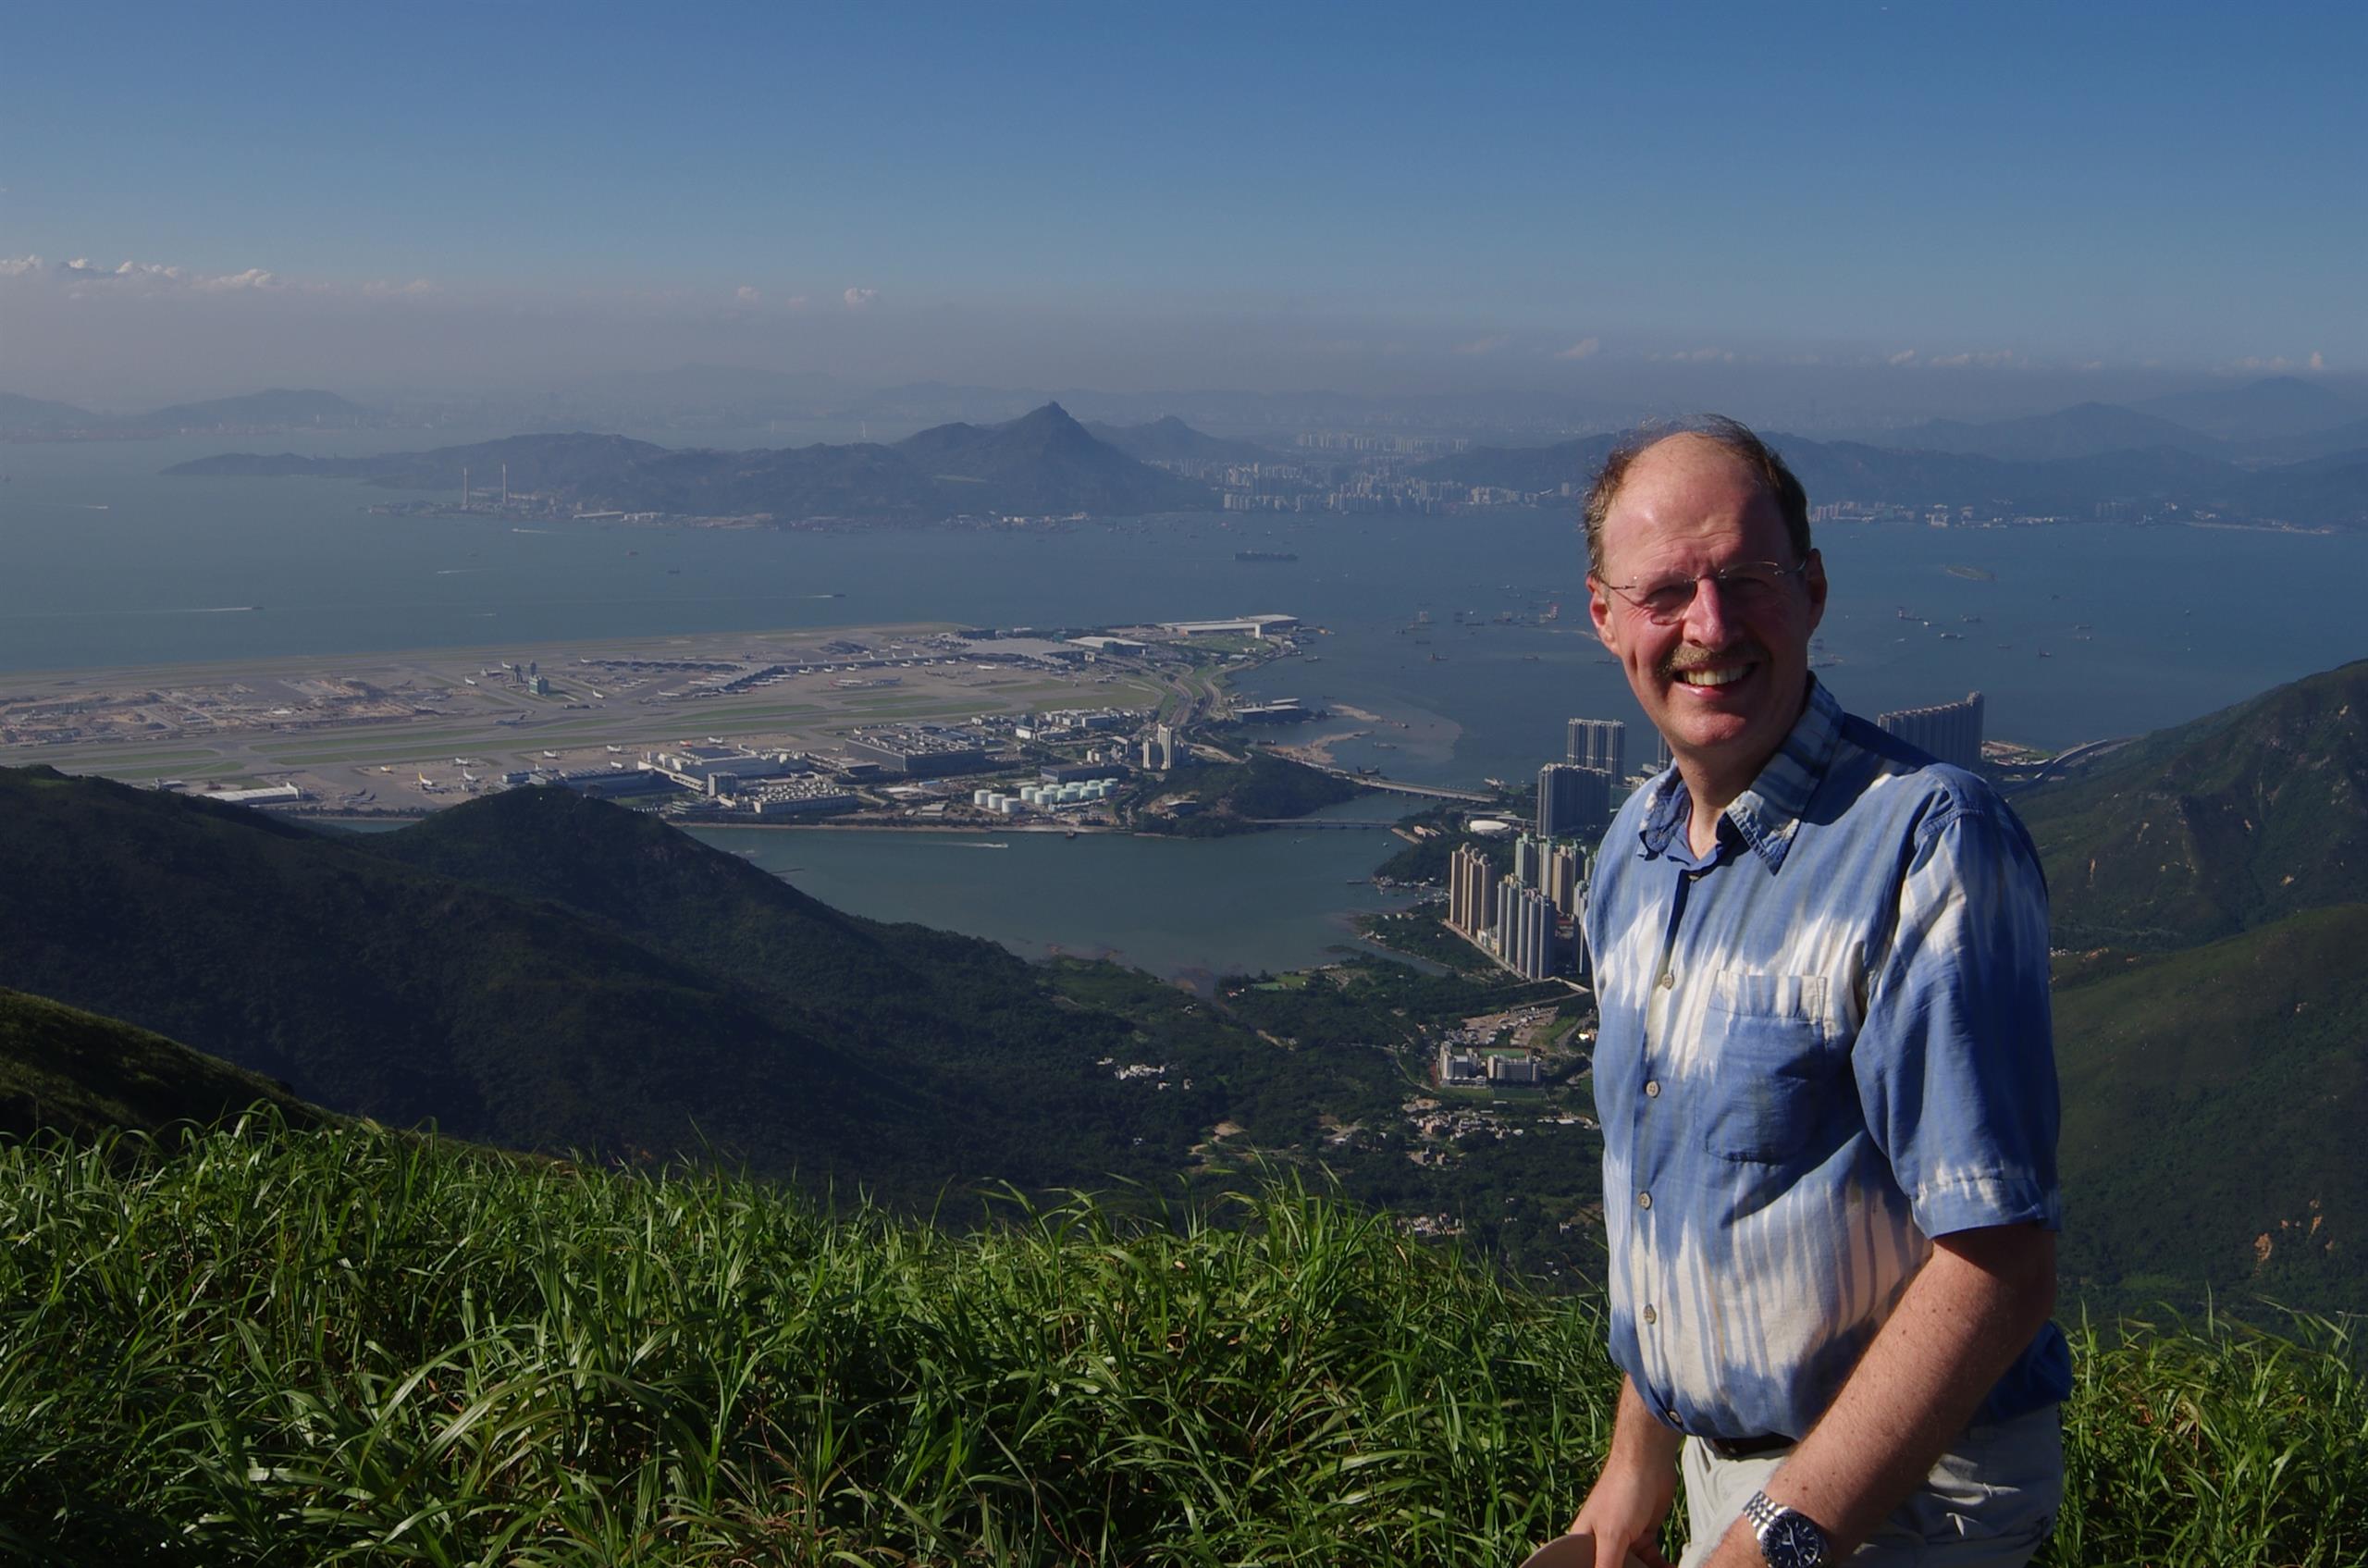 Chris with Hong Kong airport in the background